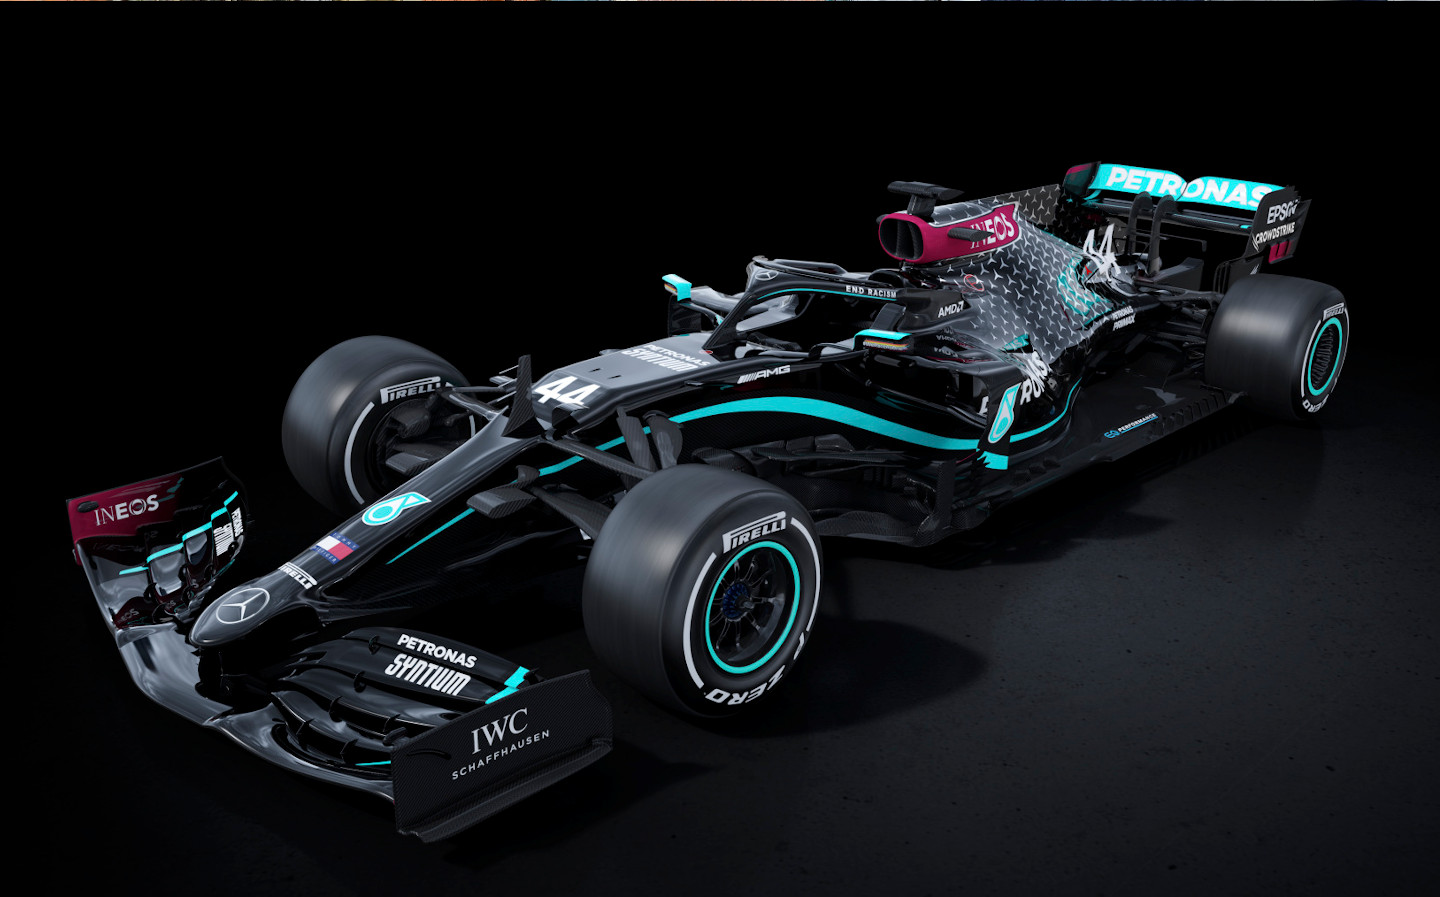 Mercedes F1 adopts black livery in gesture against racism within motorsport